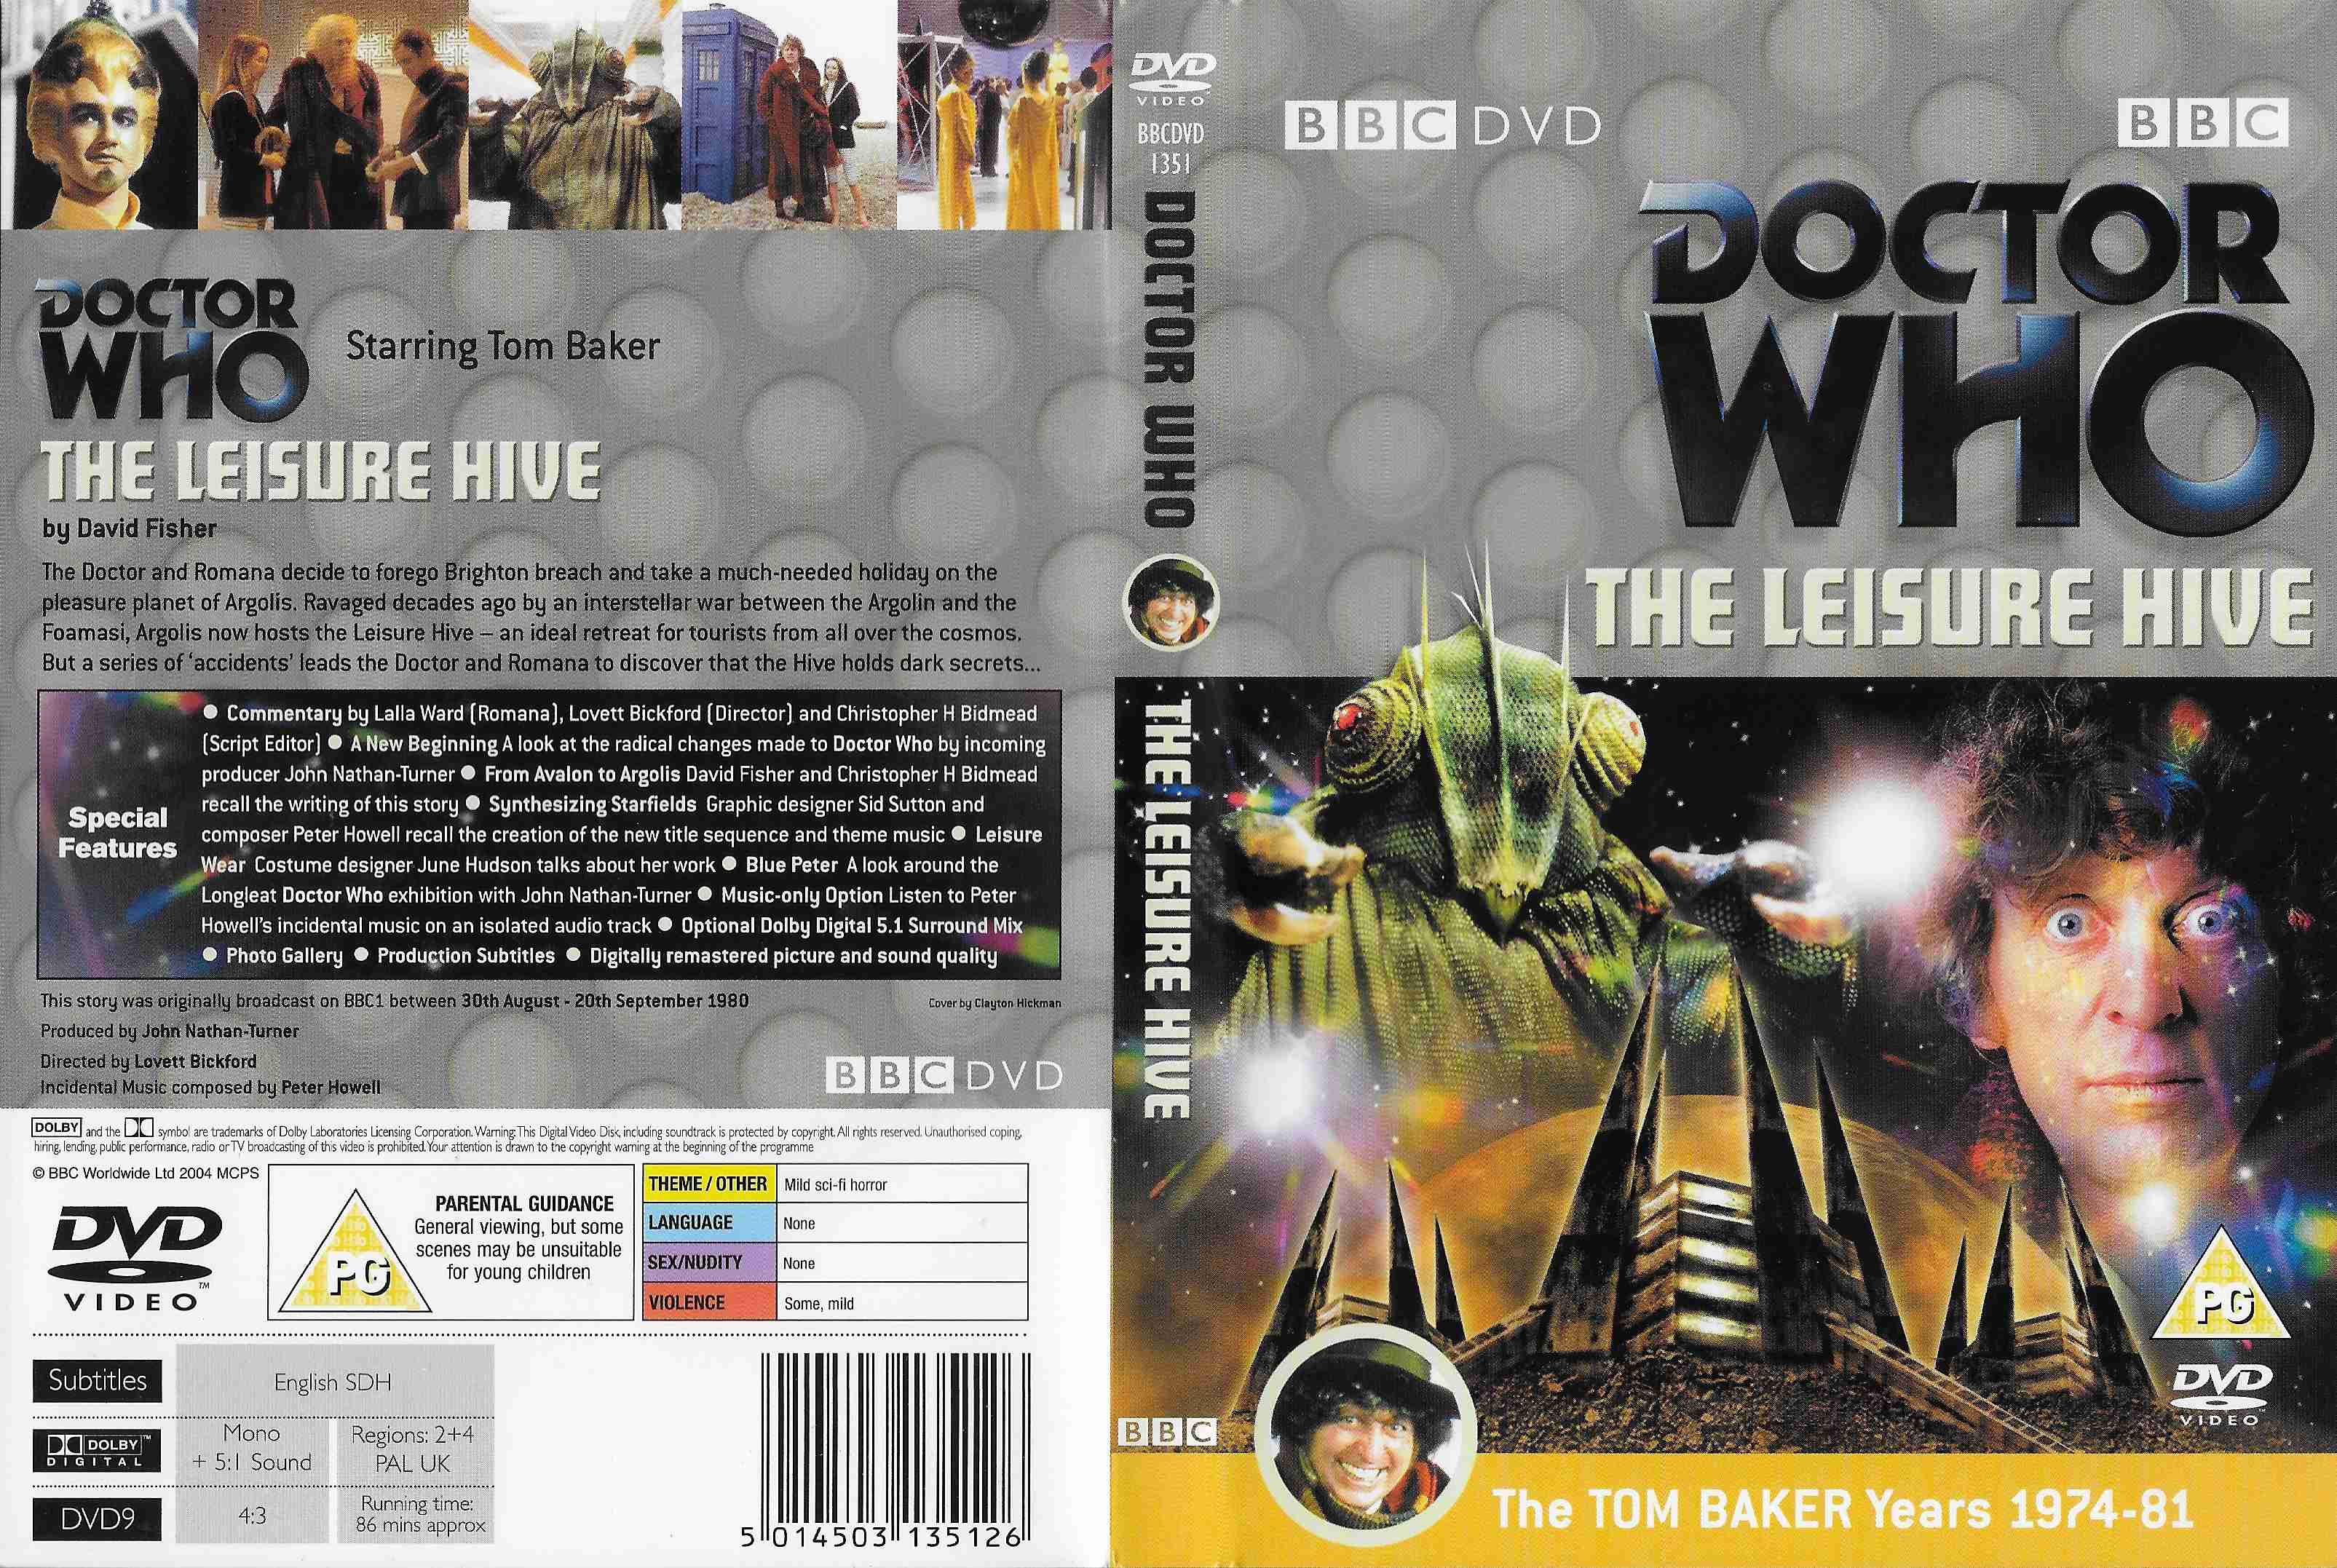 Picture of BBCDVD 1351 Doctor Who - The leisure hive by artist David Fisher from the BBC records and Tapes library